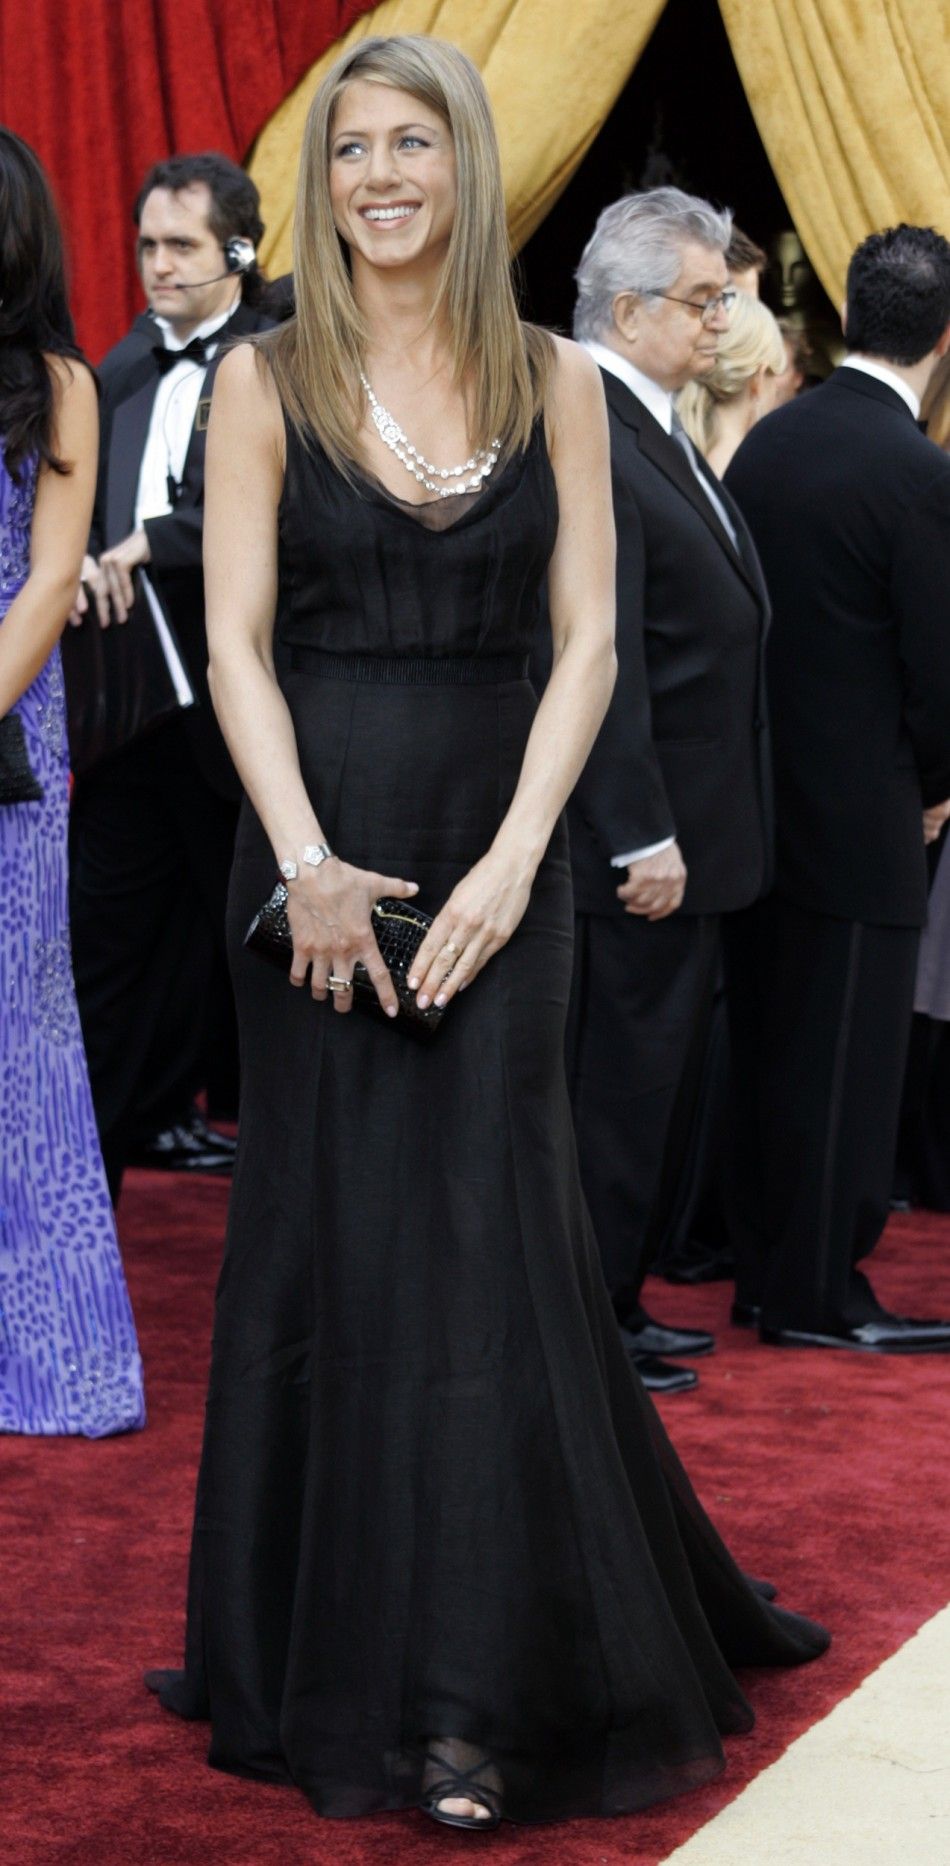 Jennifer Aniston arrives for the 78th annual Academy Awards in Hollywood